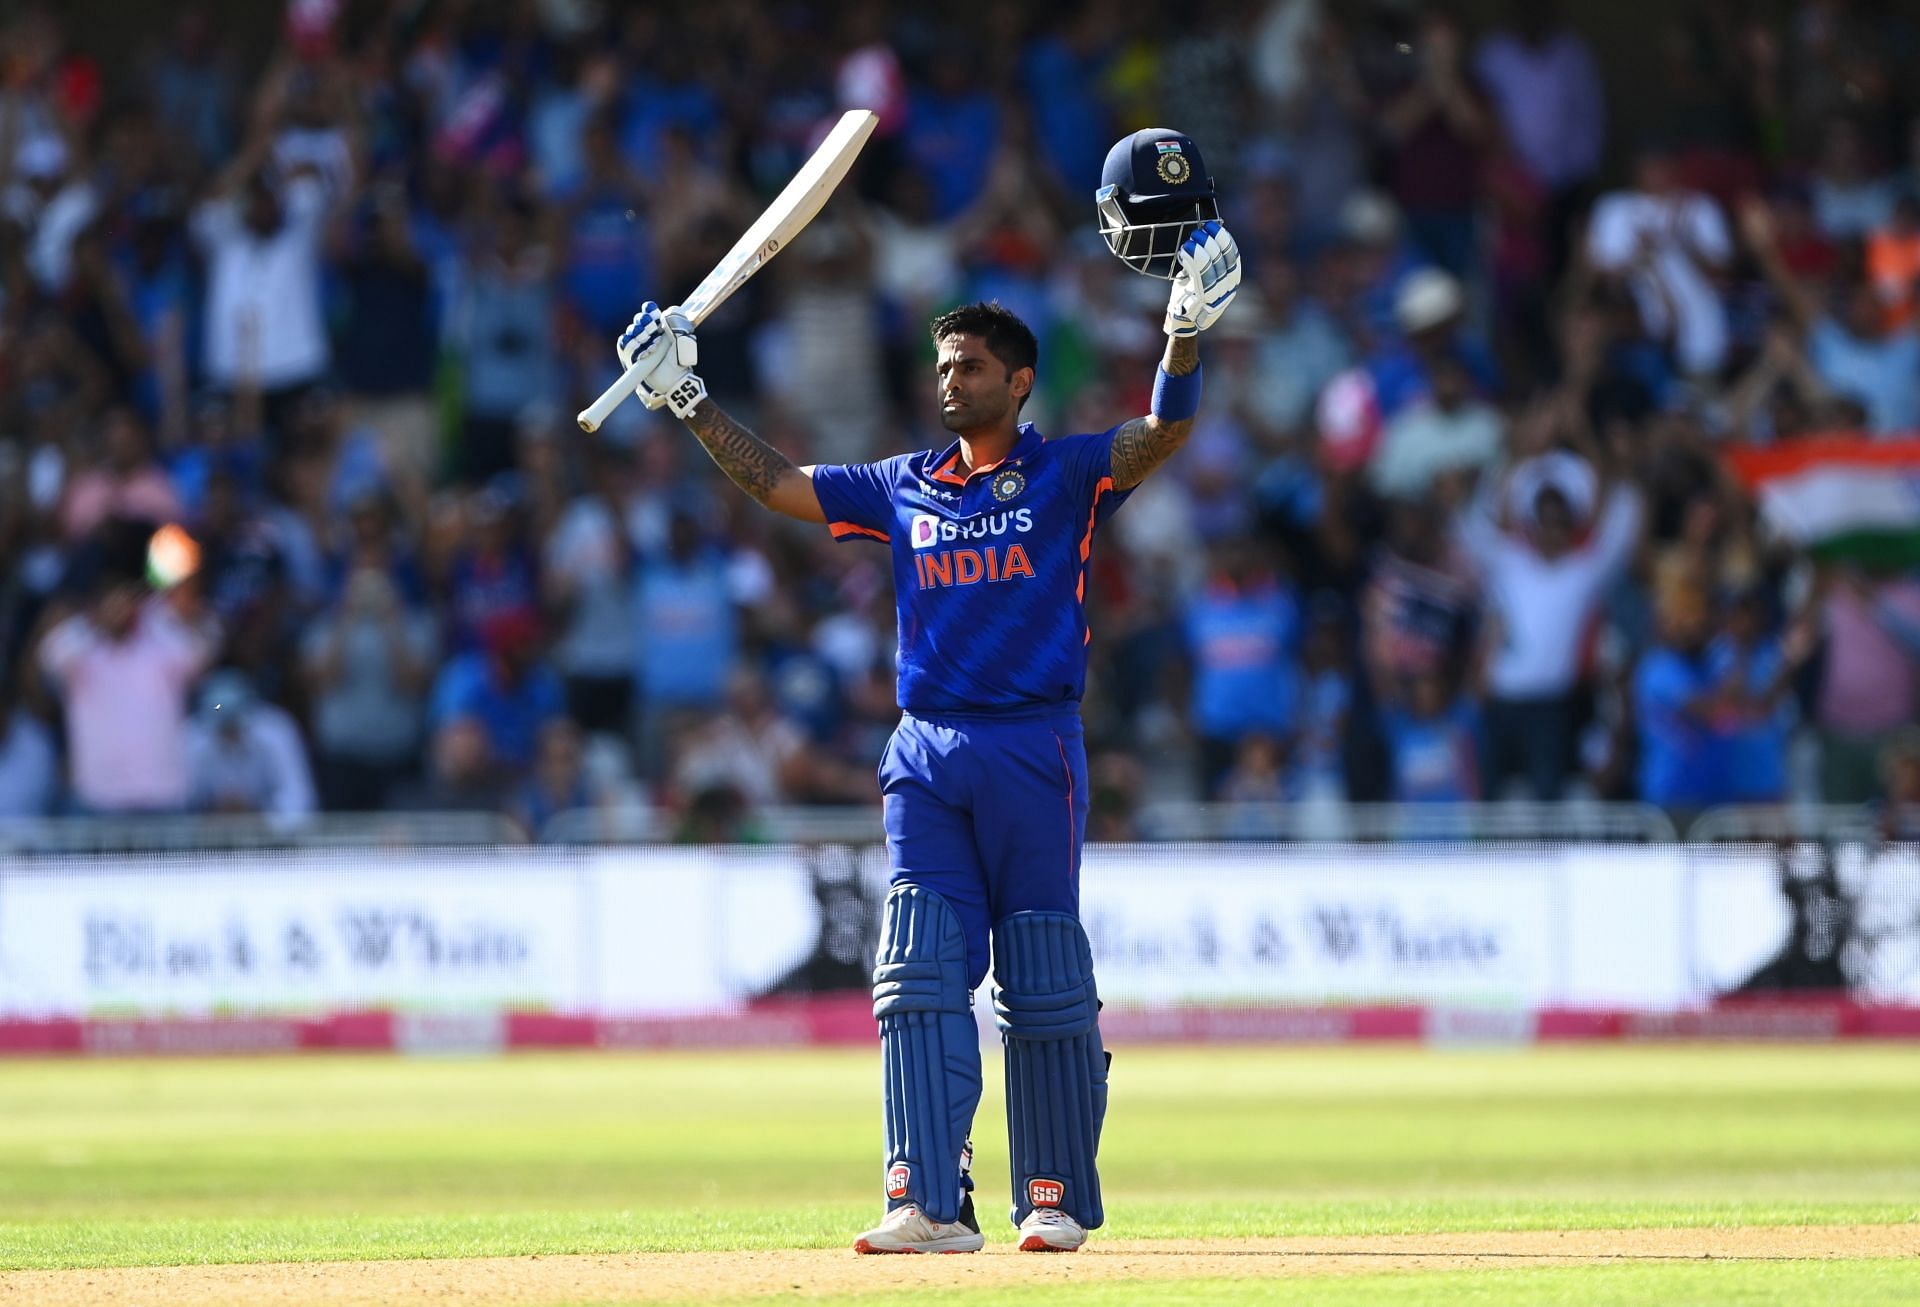 England v India - 3rd Vitality IT20 (Image: Getty)